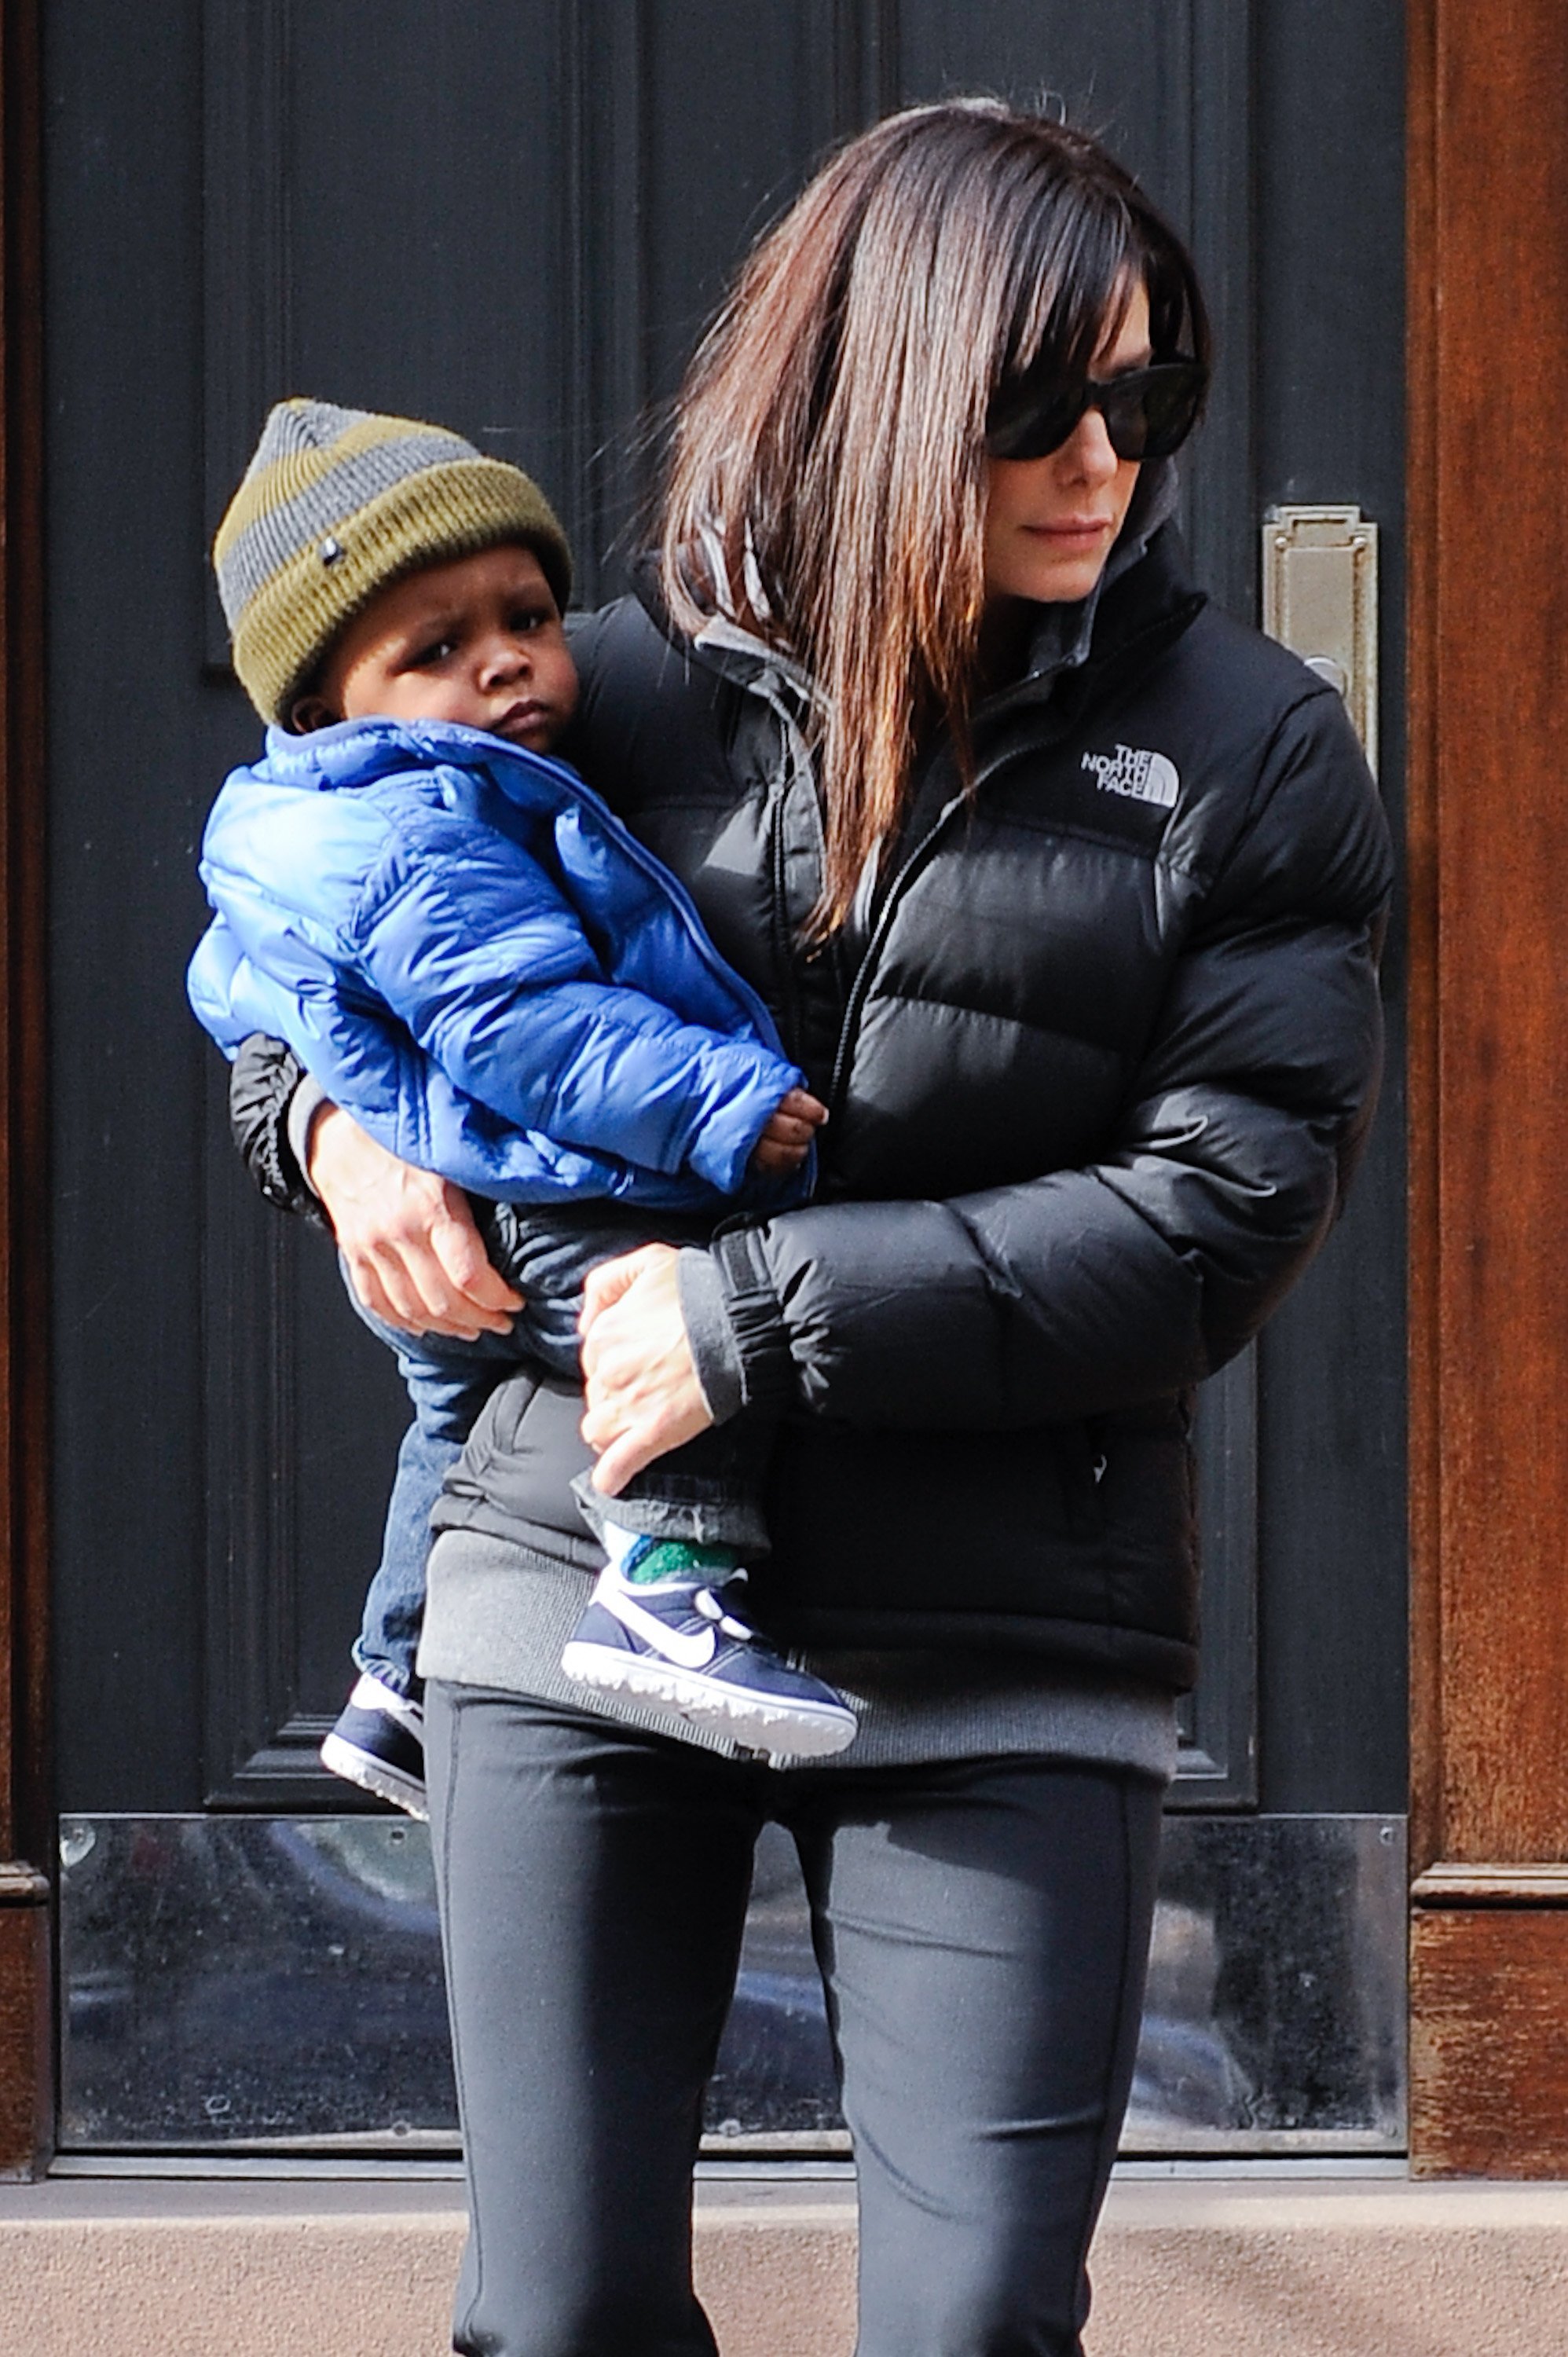 Sandra Bullock and her son Louis Bullock on January 20, 2011 in New York City | Source: Getty Images